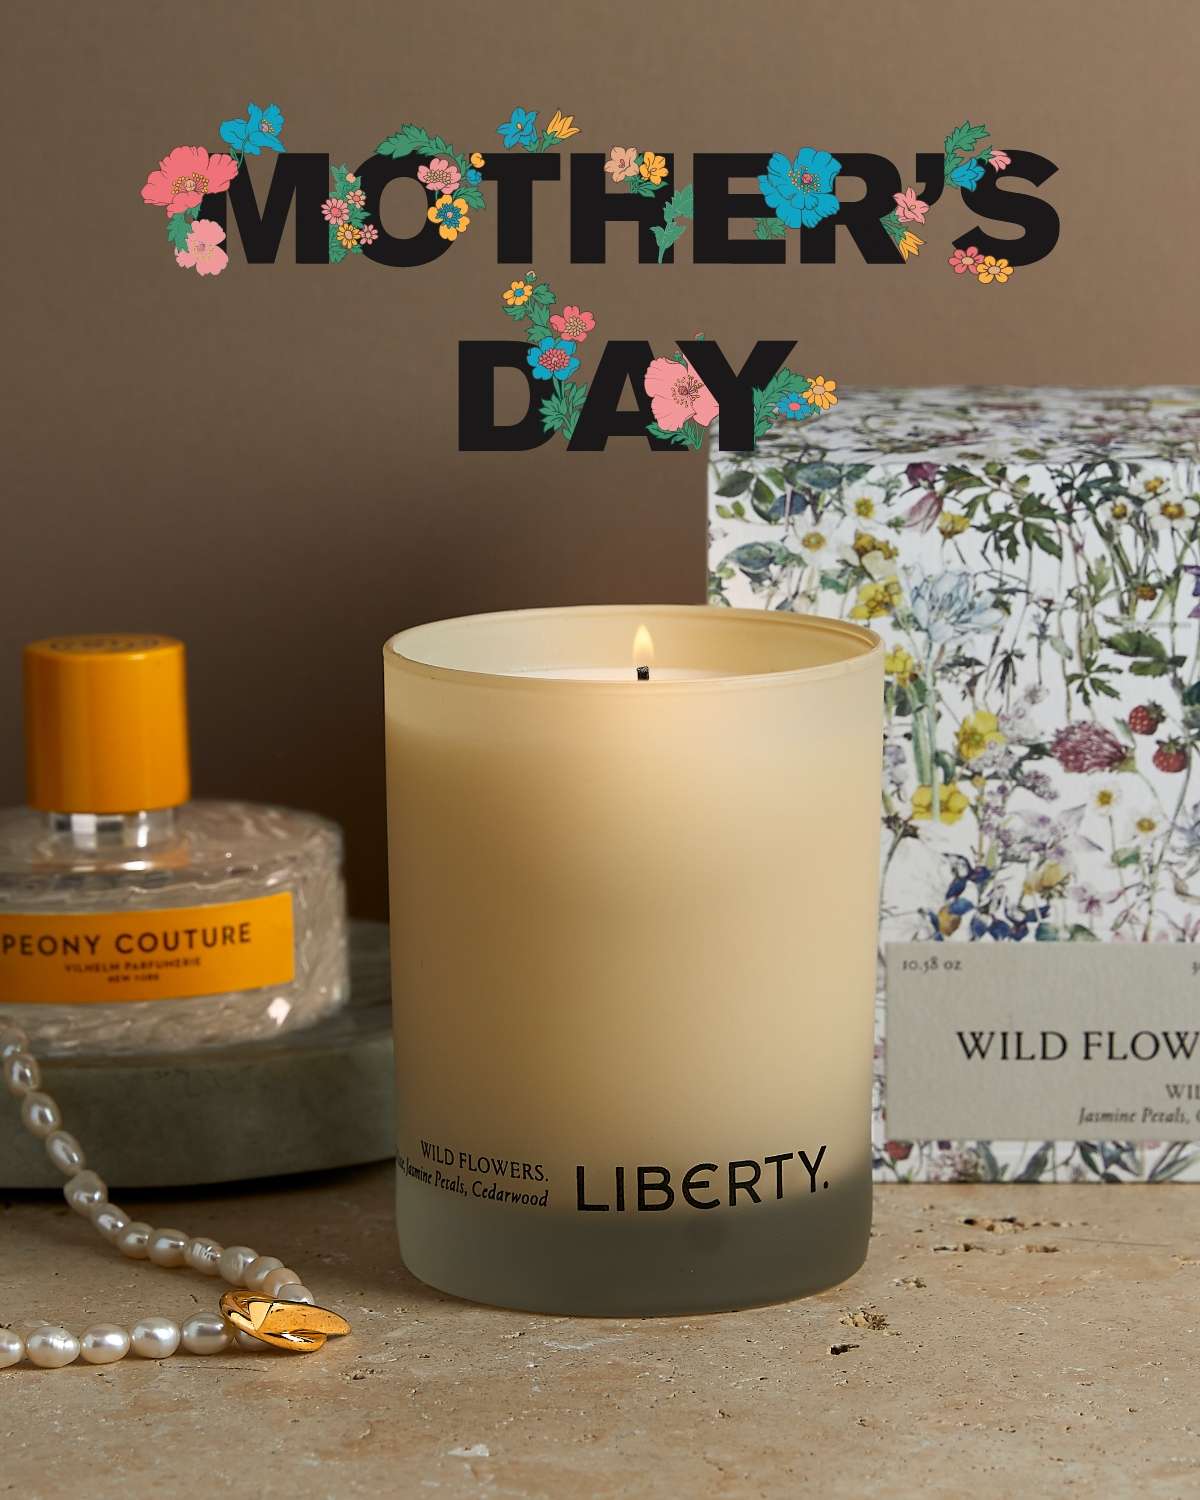 The Mother of All Mother’s Day Gifts